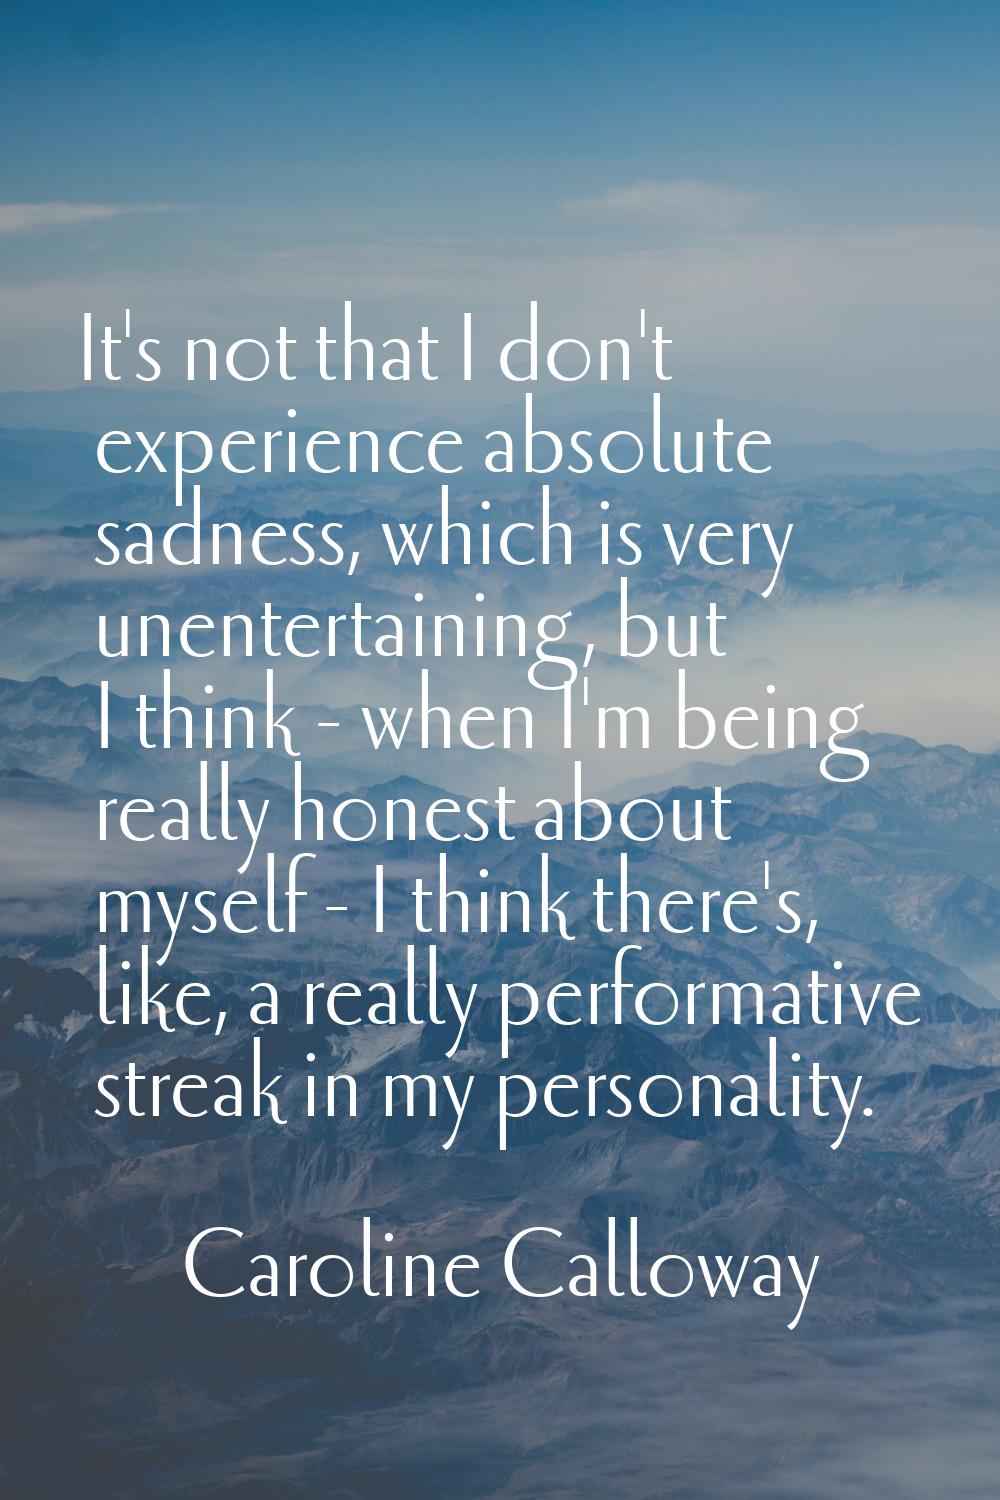 It's not that I don't experience absolute sadness, which is very unentertaining, but I think - when